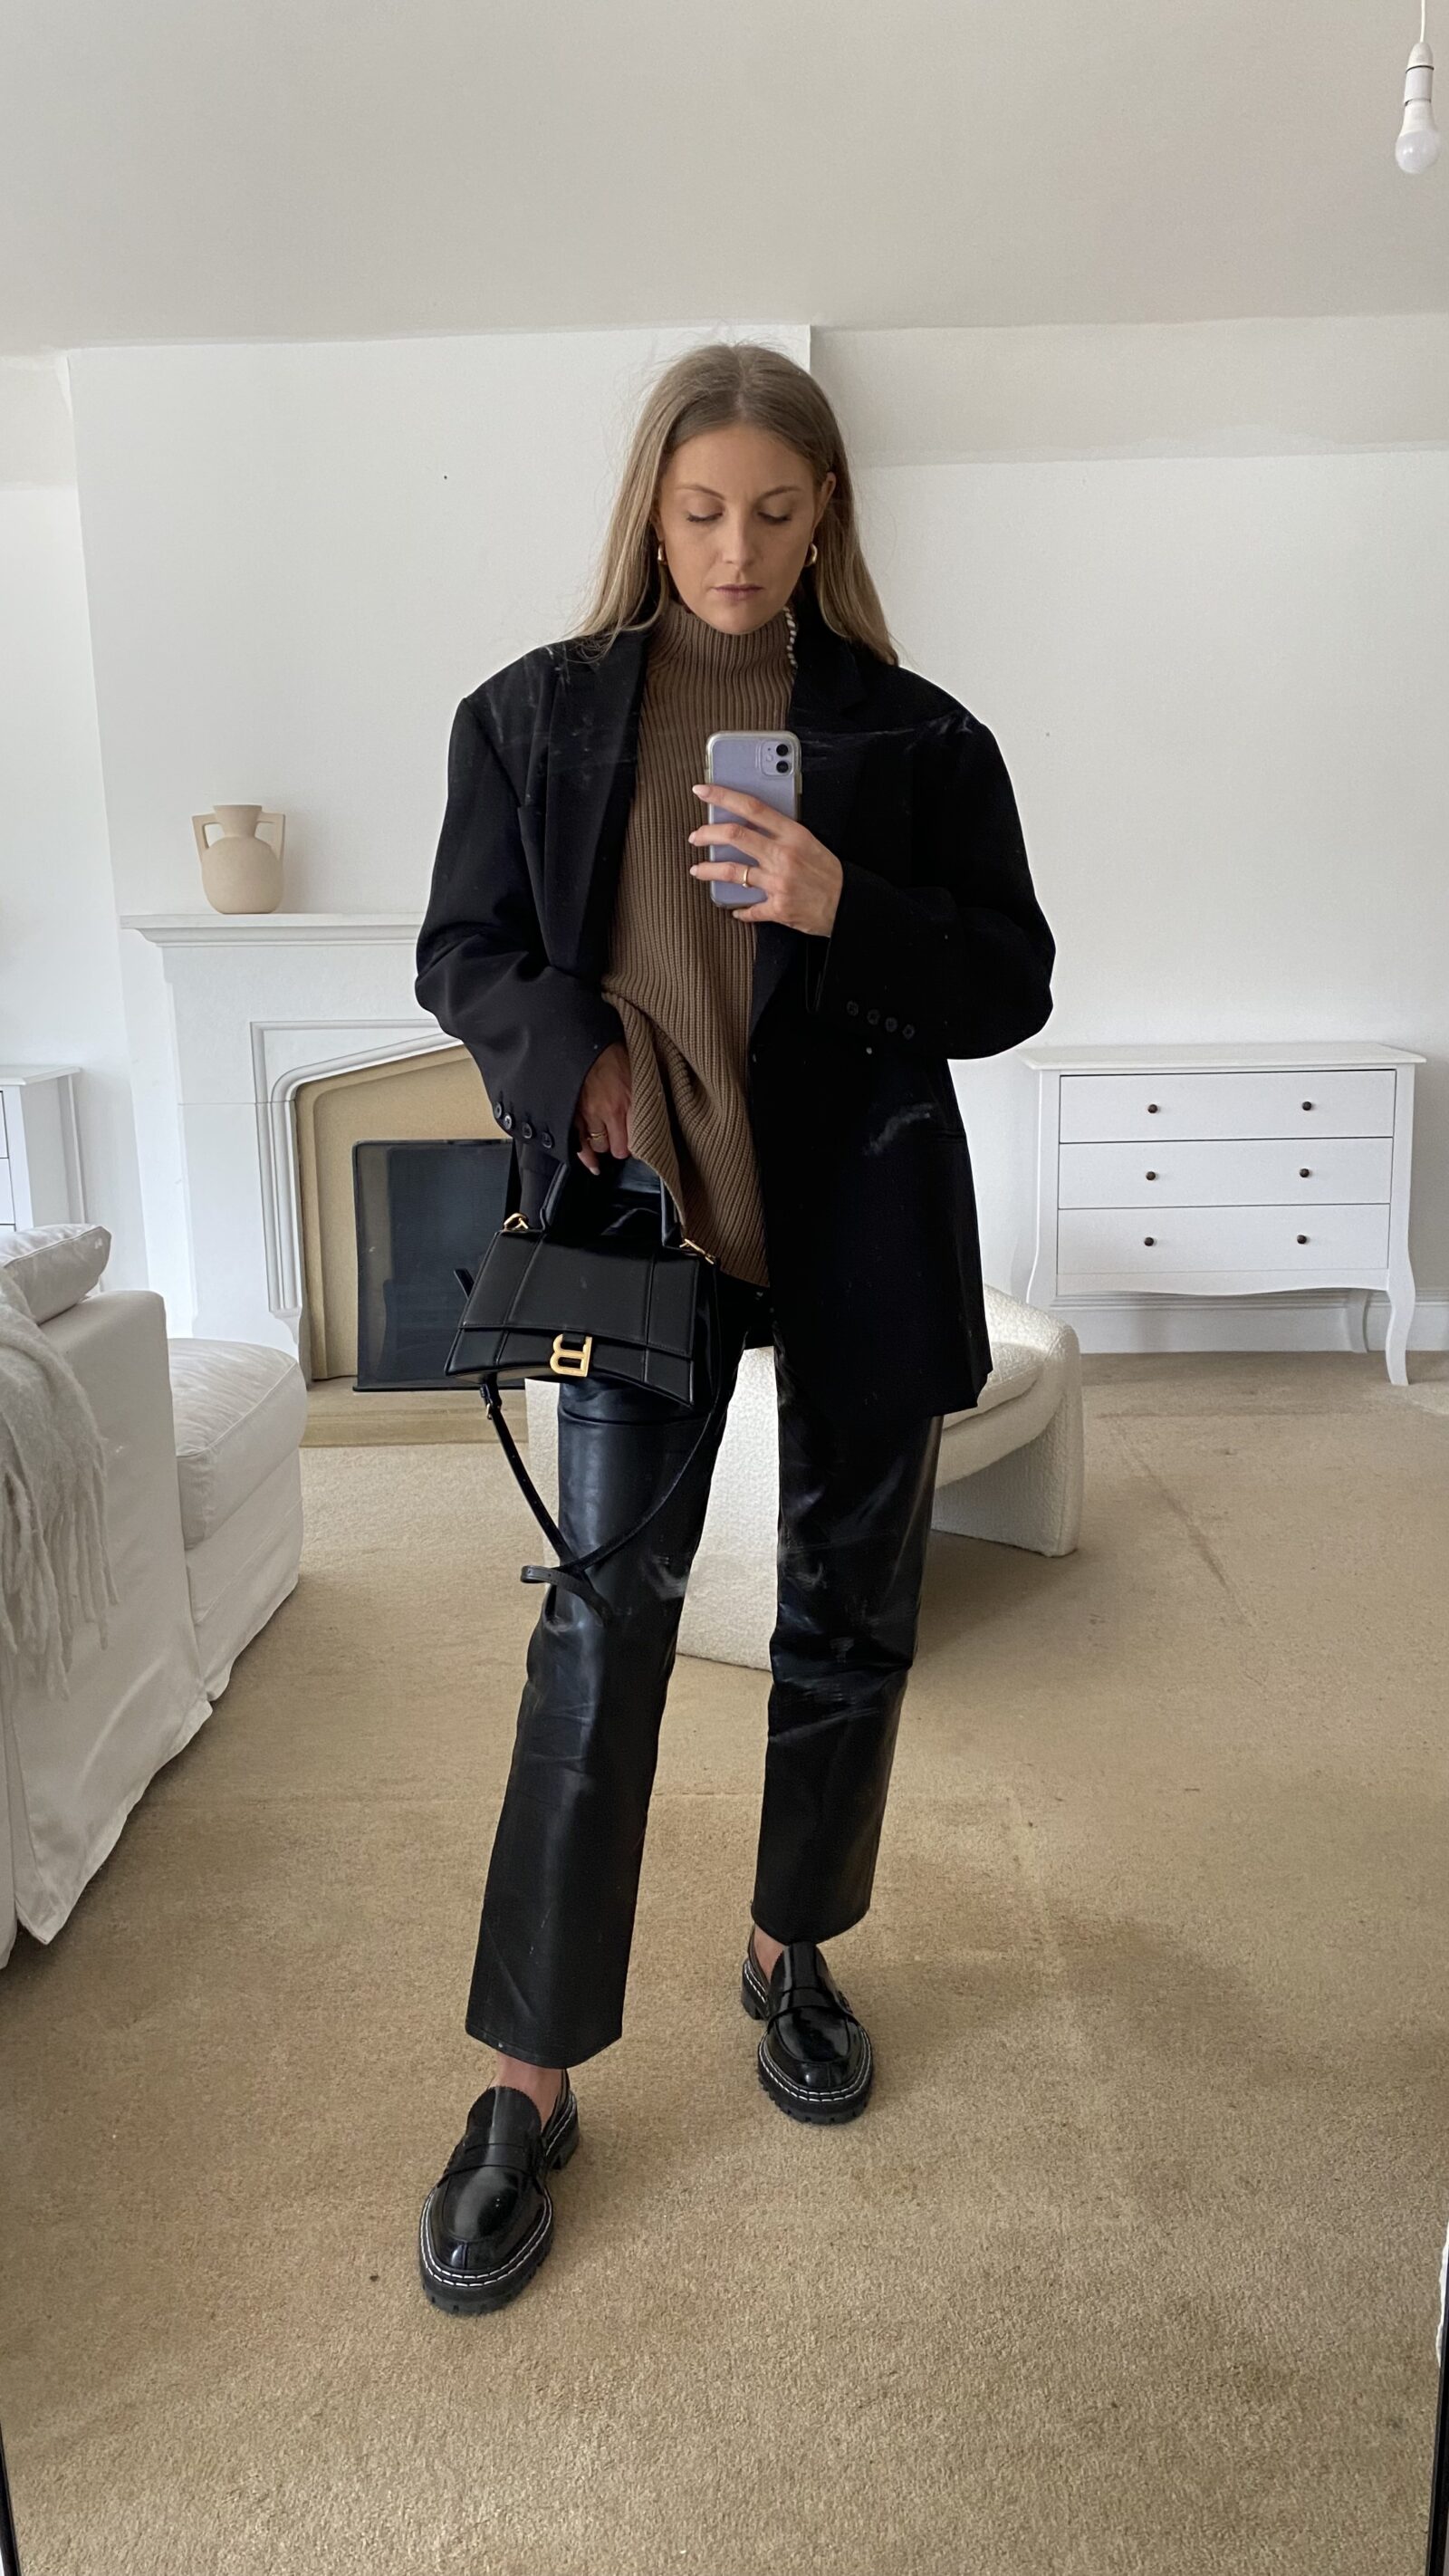 WORKWEAR OUTFIT IDEAS